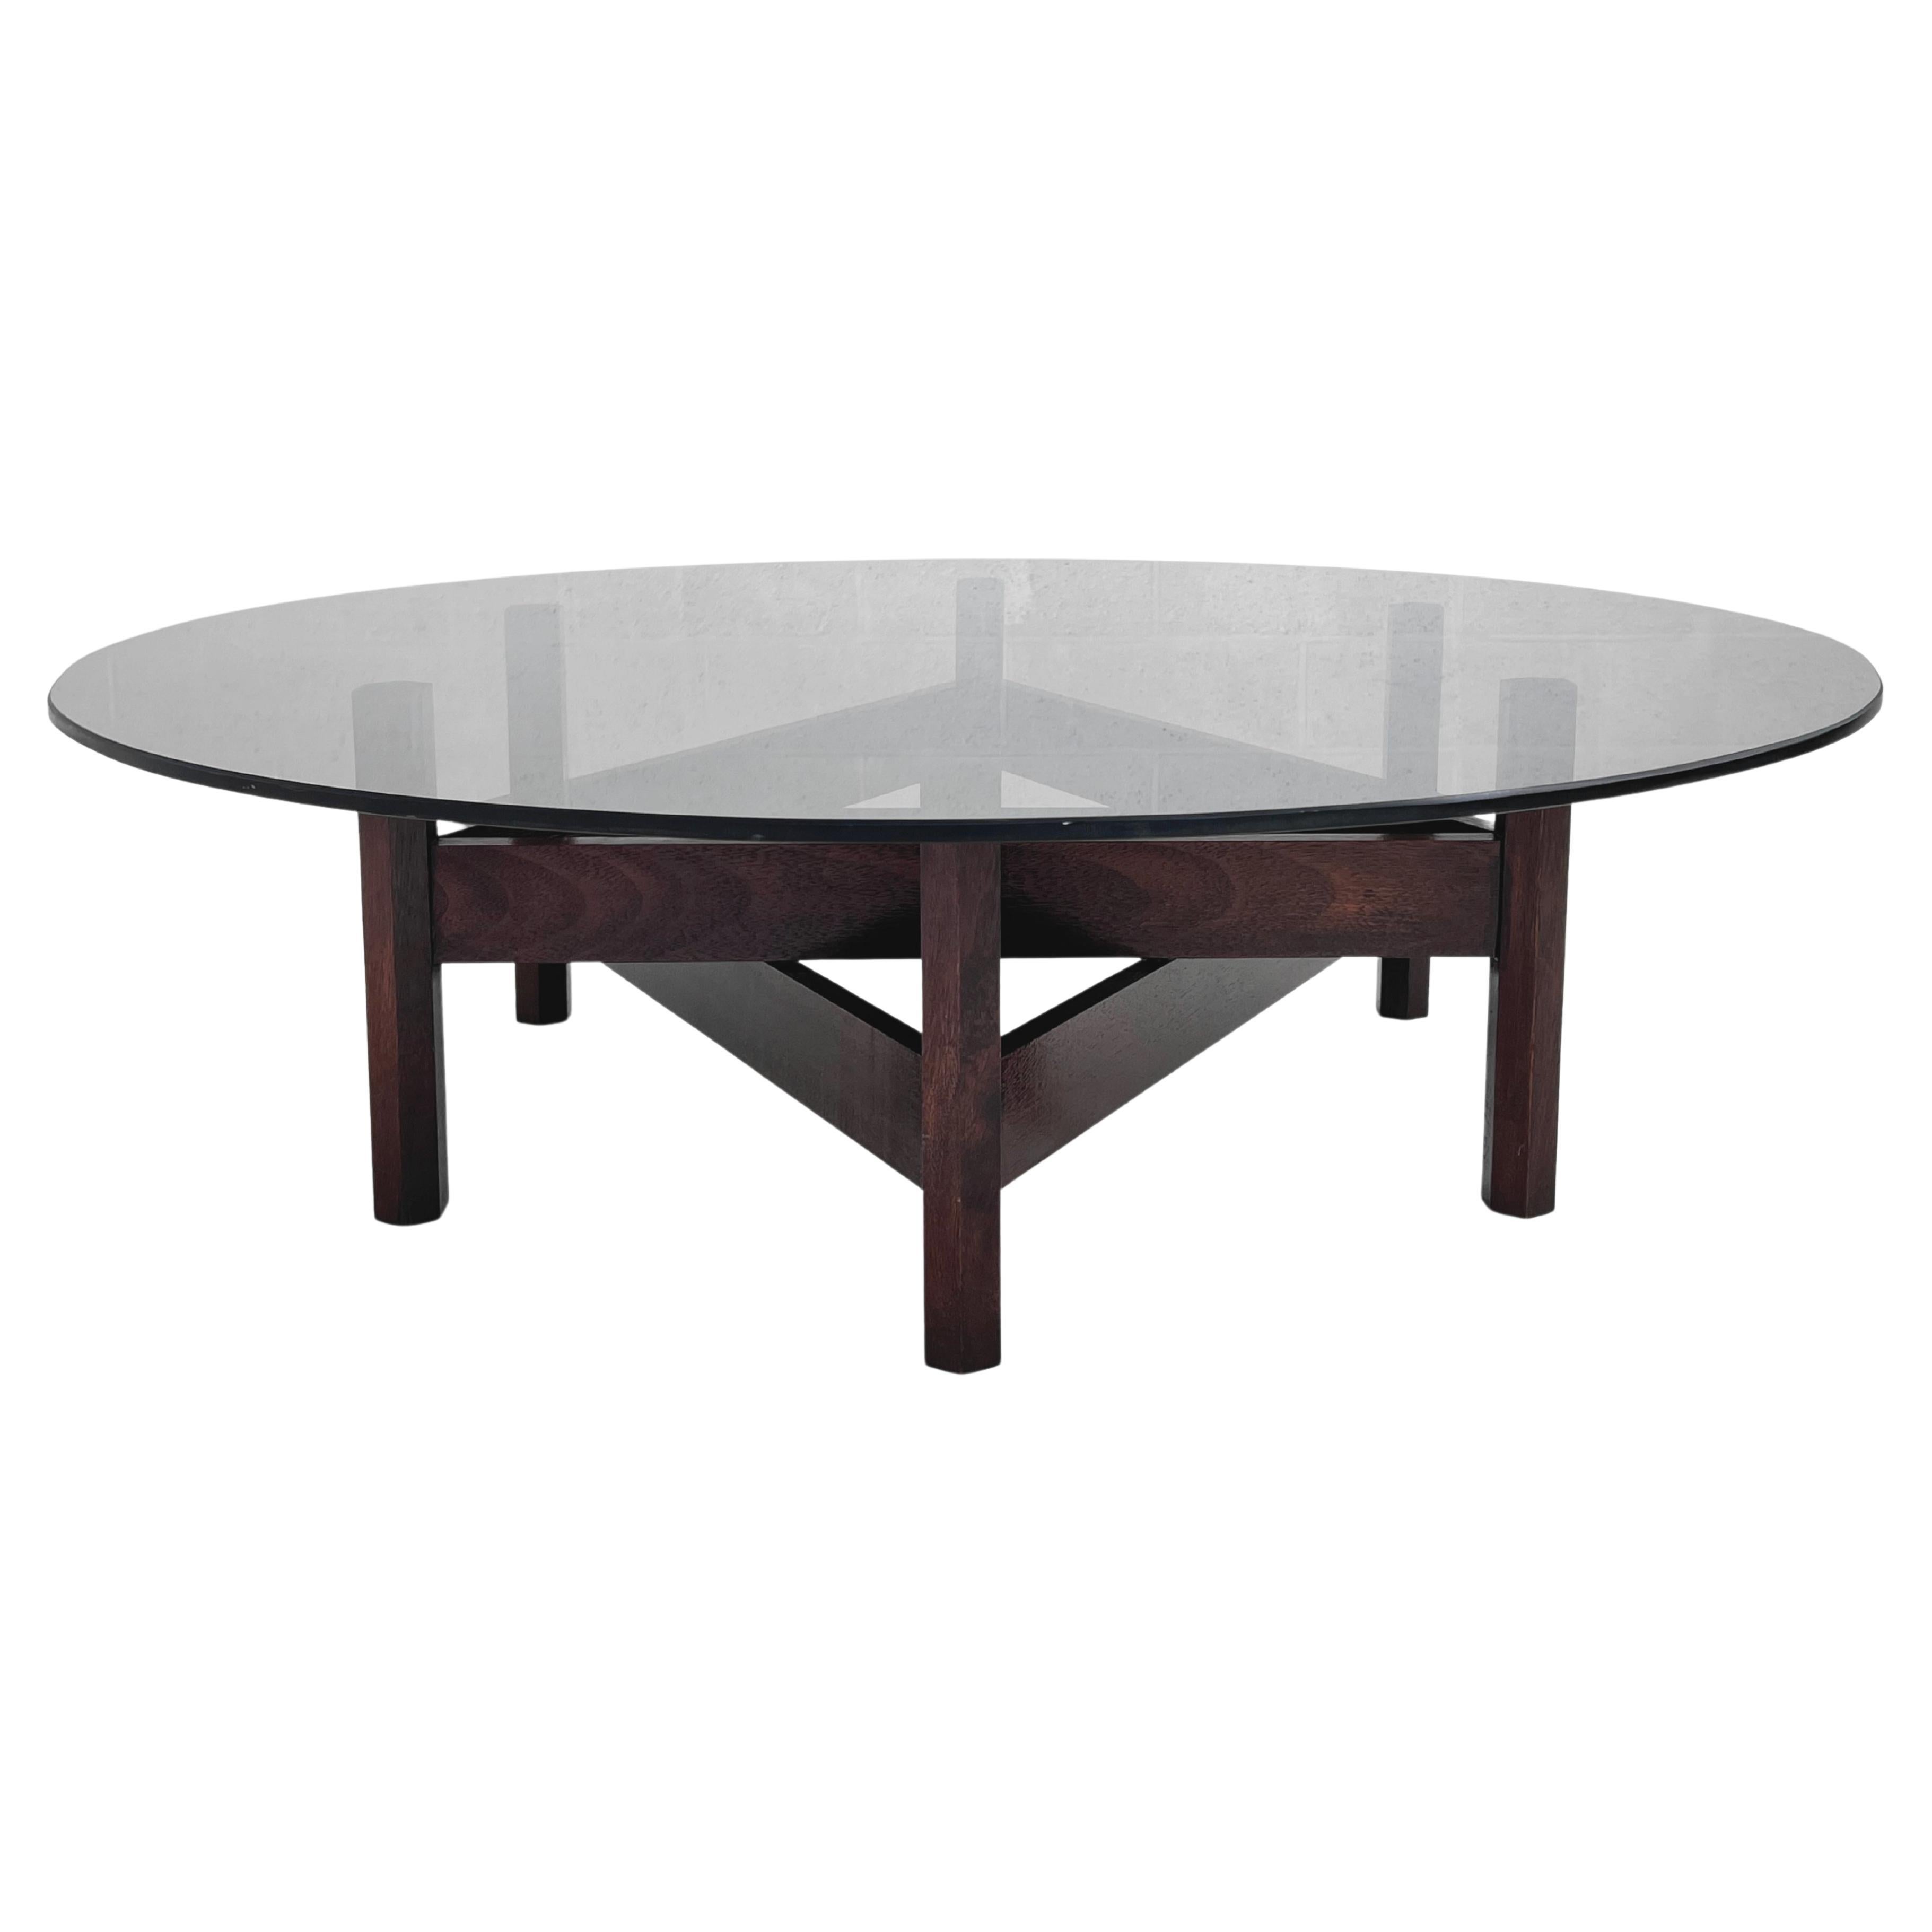 MCM Design Round Glass Top And Star Wooden Base Coffee Table